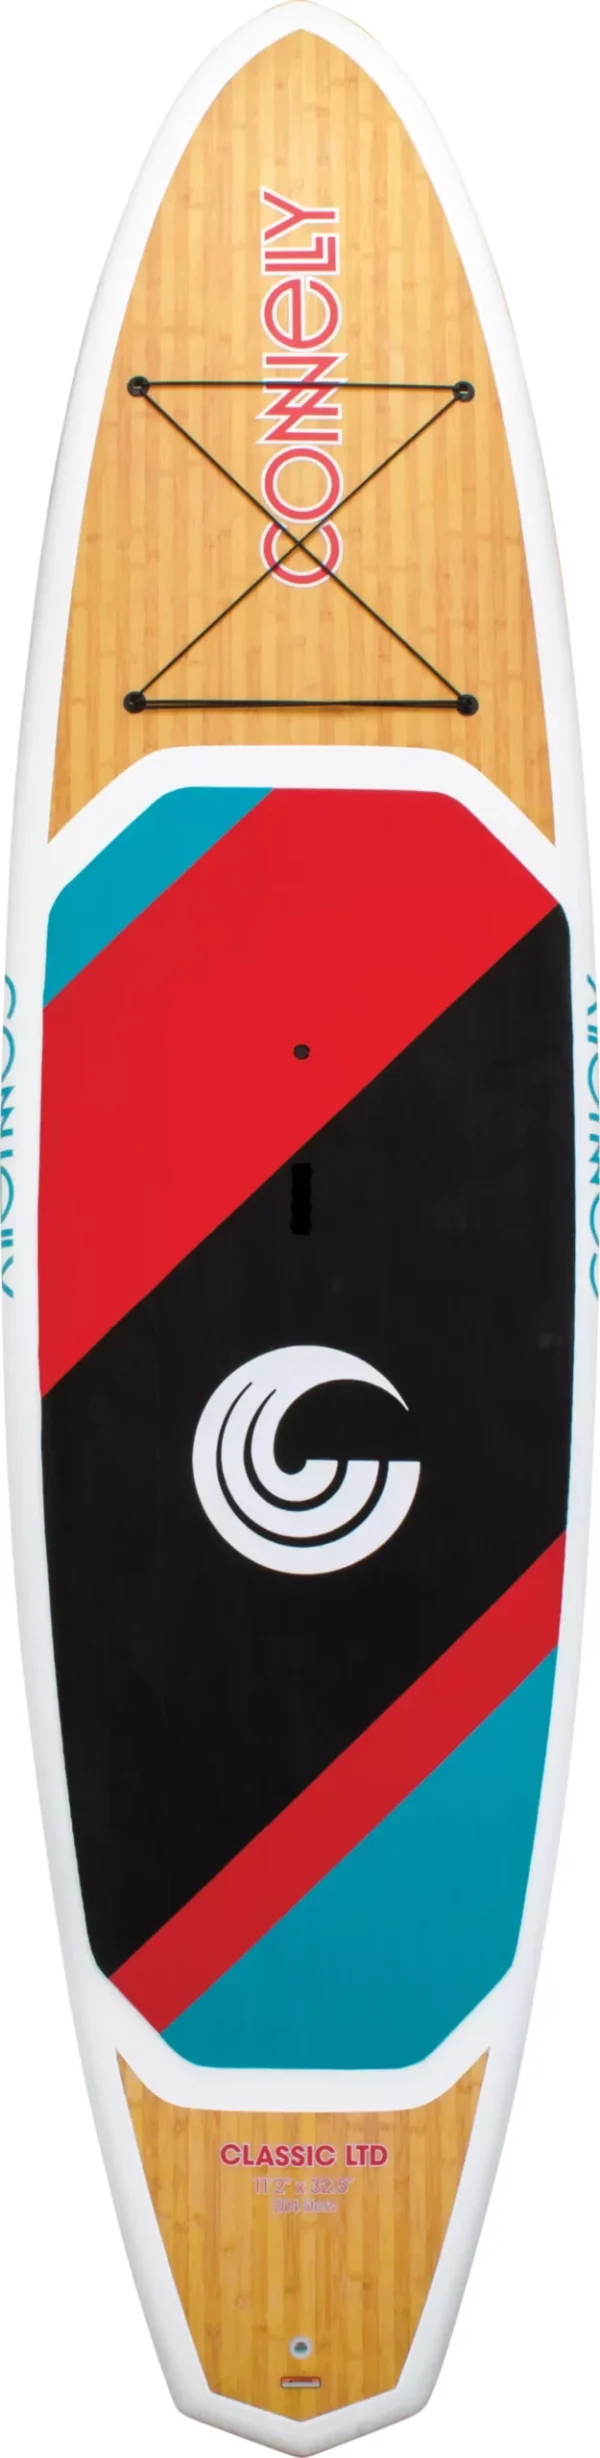 Connelly Classic 11 LTD Stand-Up Paddle Board